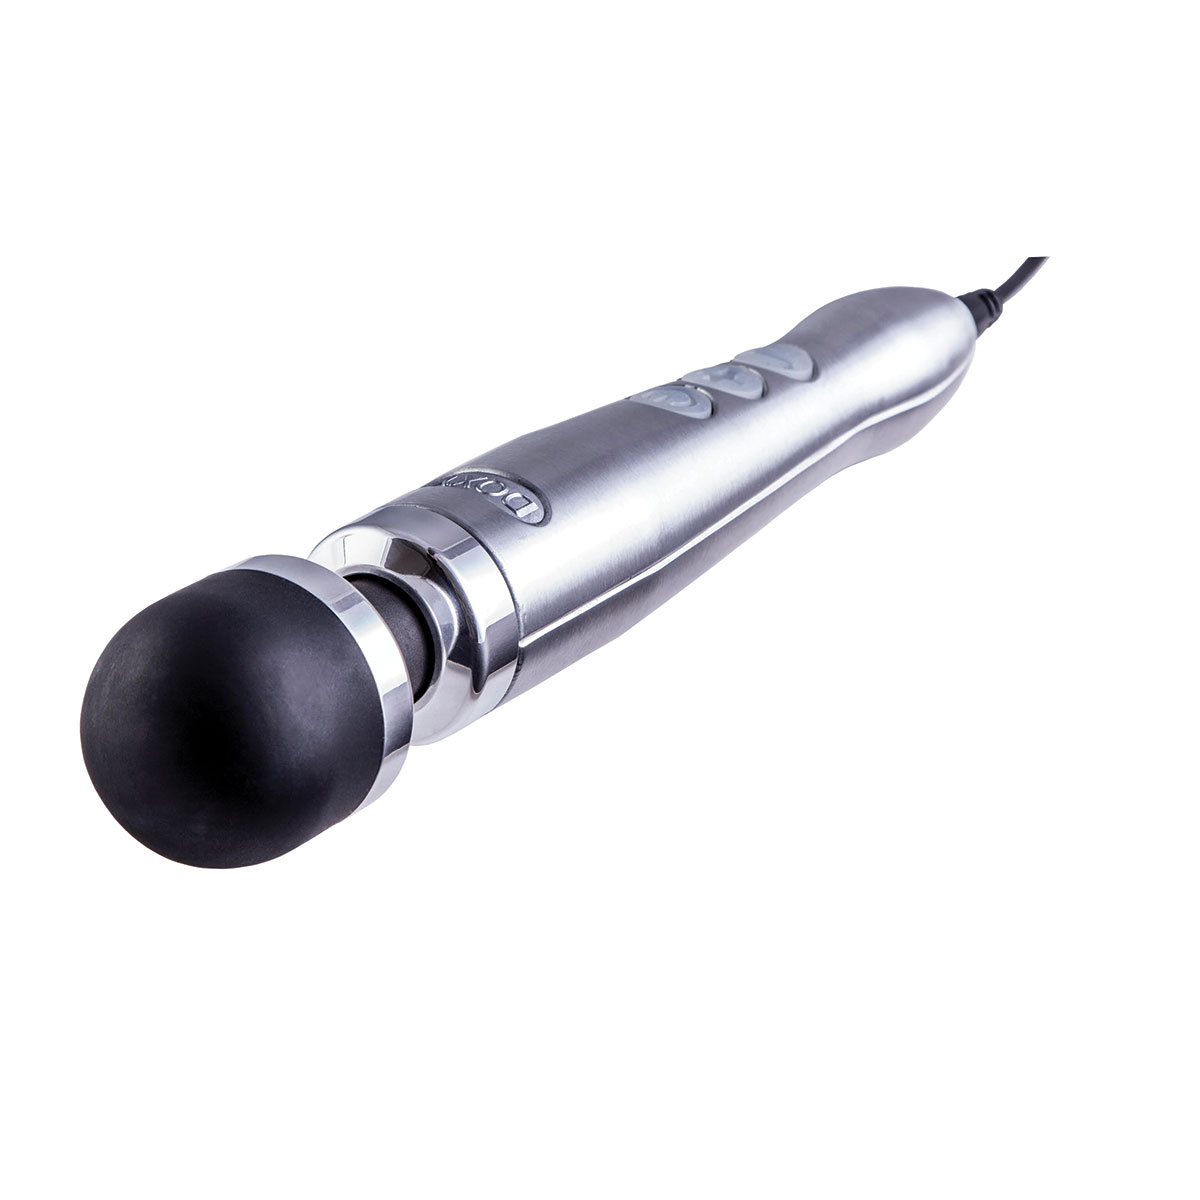 Doxy Die Cast 3 Compact Wand Vibrator Brushed Metal - image 2 of 2